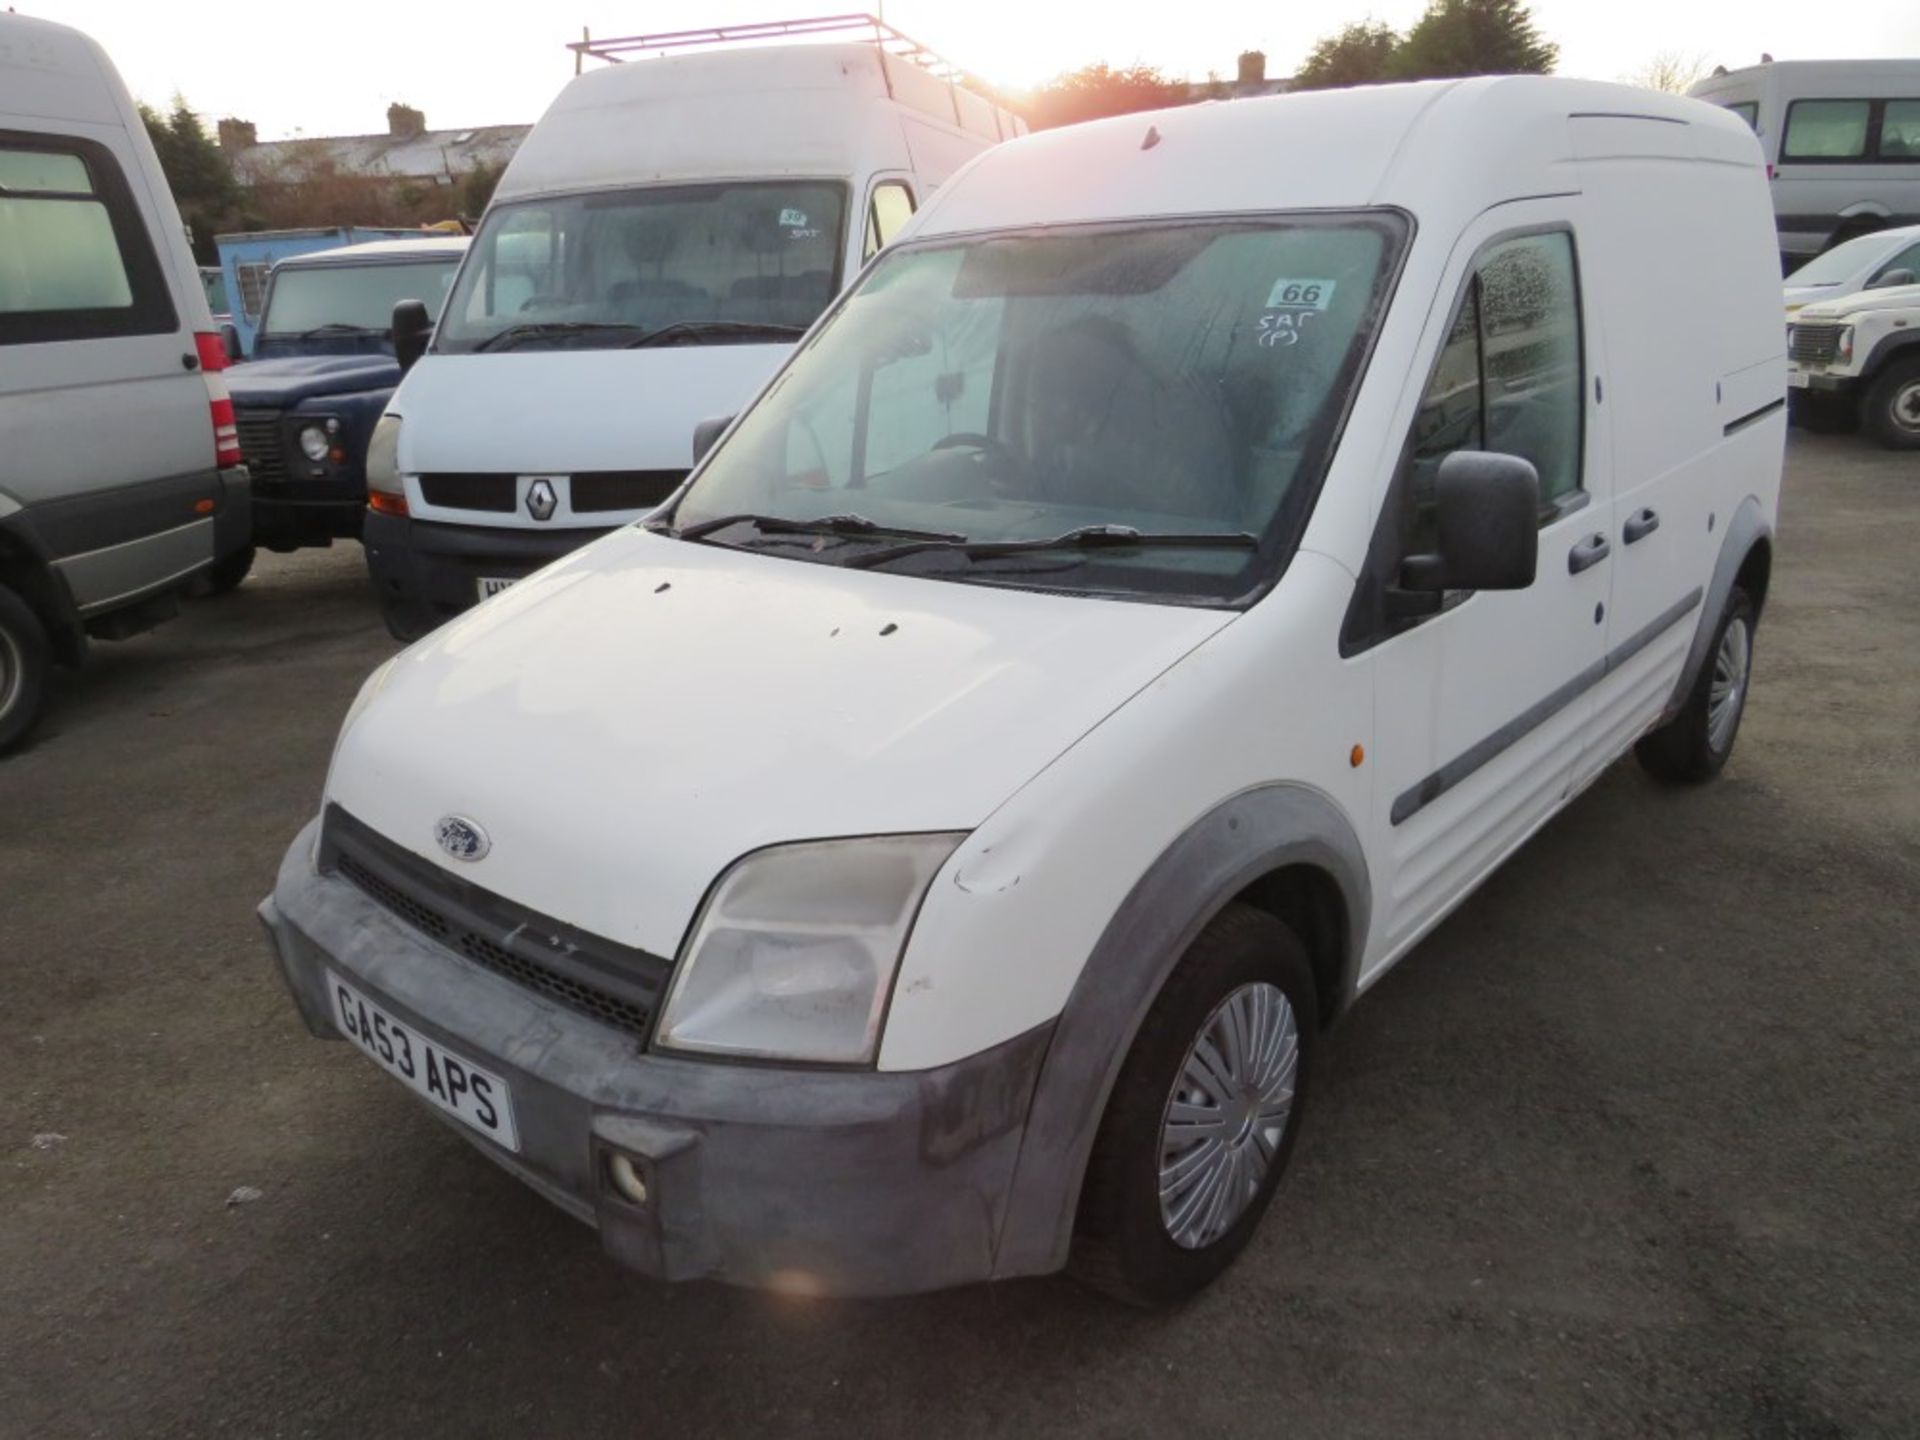 53 reg FORD TRANSIT CONNECT L230 D, TEST 01/20, 130320M NOT WARRANTED, V5 HERE, 10 FORMER KEEPERS [ - Image 2 of 6